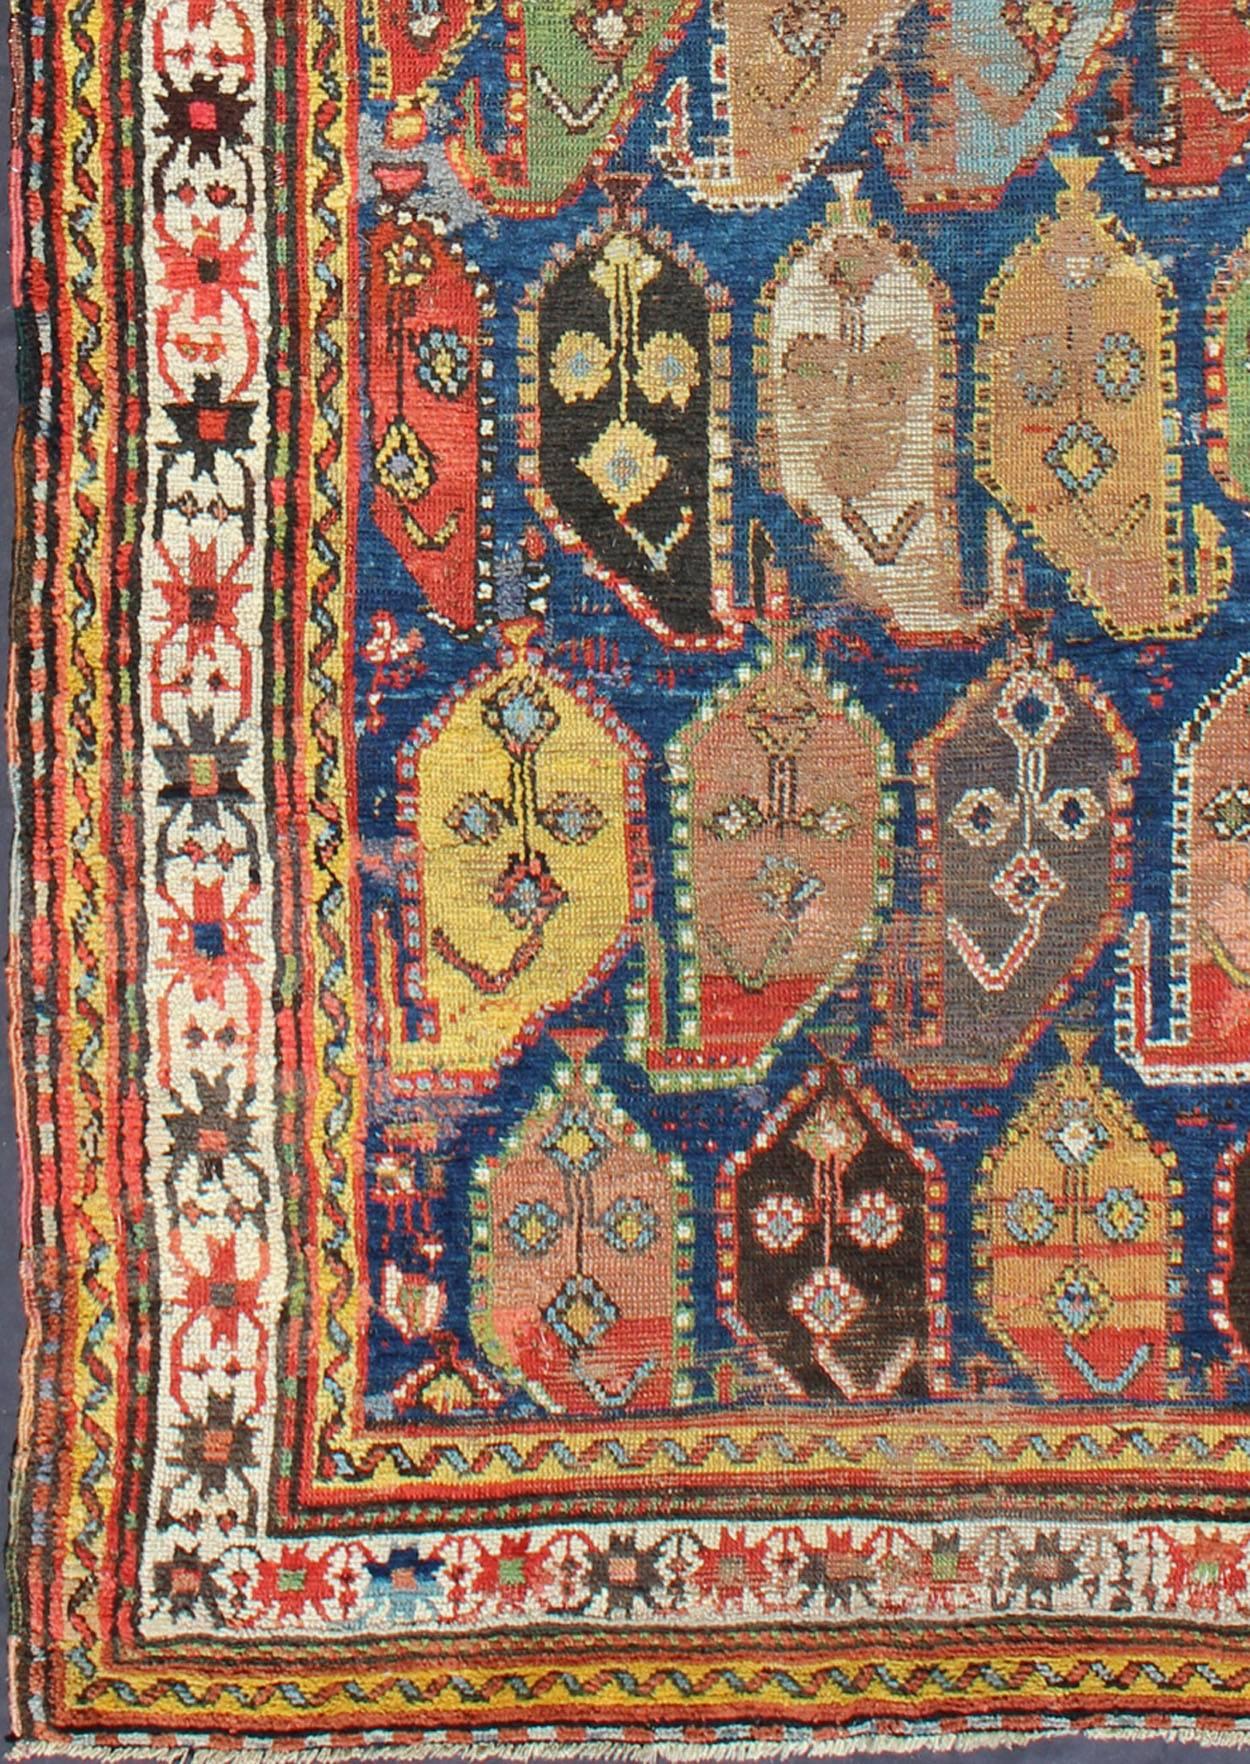 Amazing Antique Caucasian rug with Large Paisley Design in Blue Background.
This early antique Caucasian displays repeating large-scale paisleys surrounded by multi-tiered borders. Set on an indigo background, this piece has vivid and rich colors.